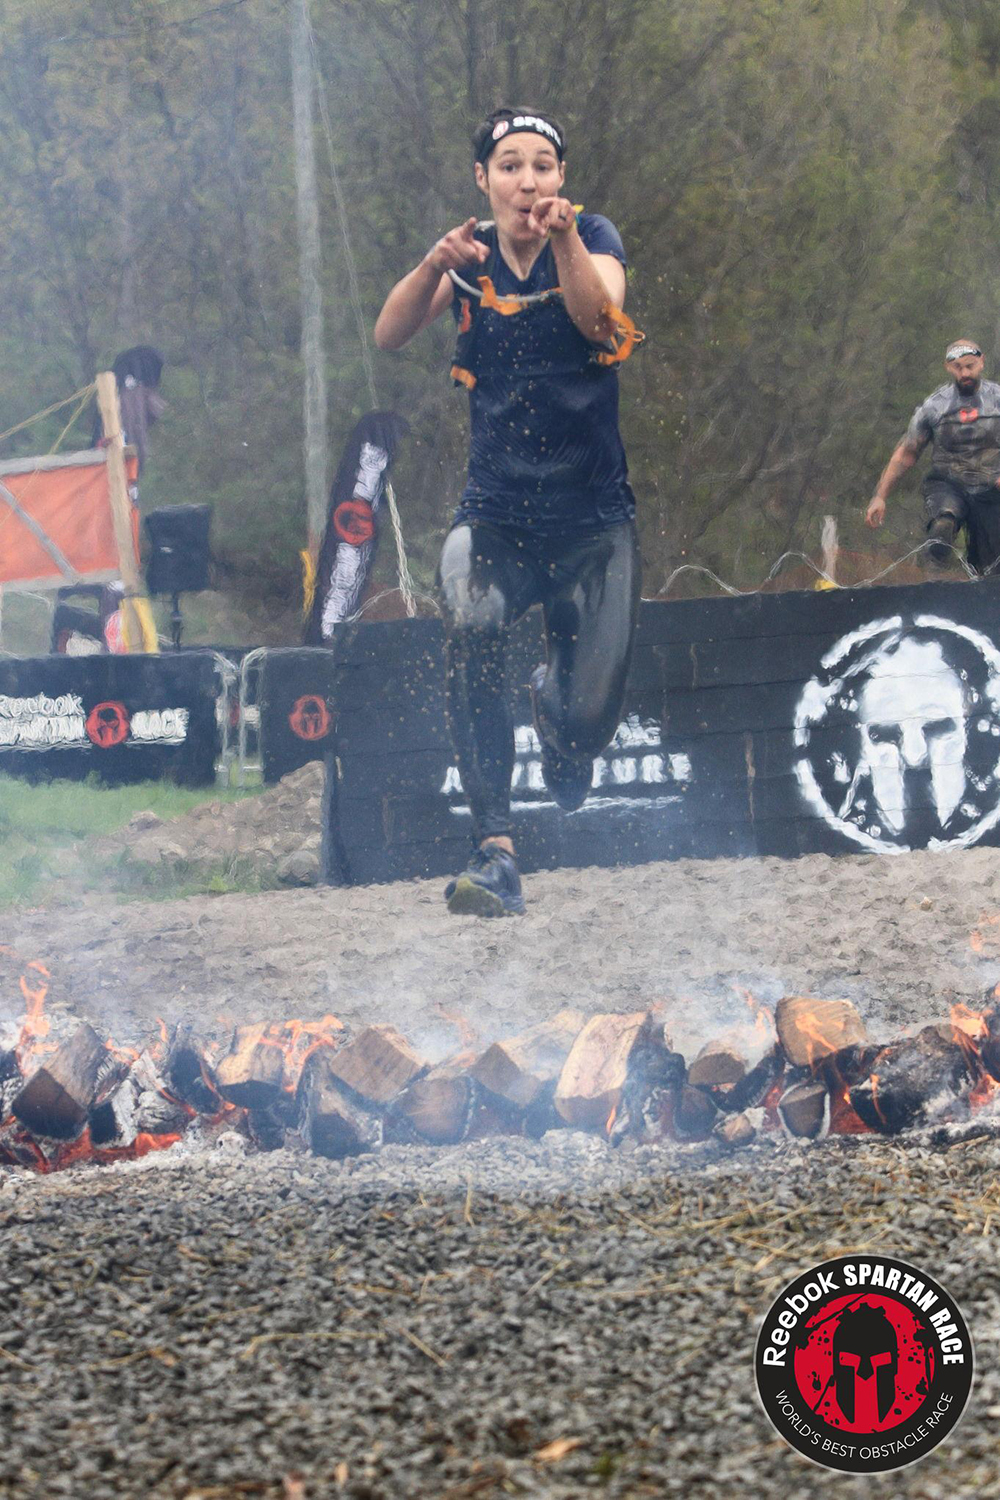 Fire Jump at the 2016 New Jersey Spartan Beast